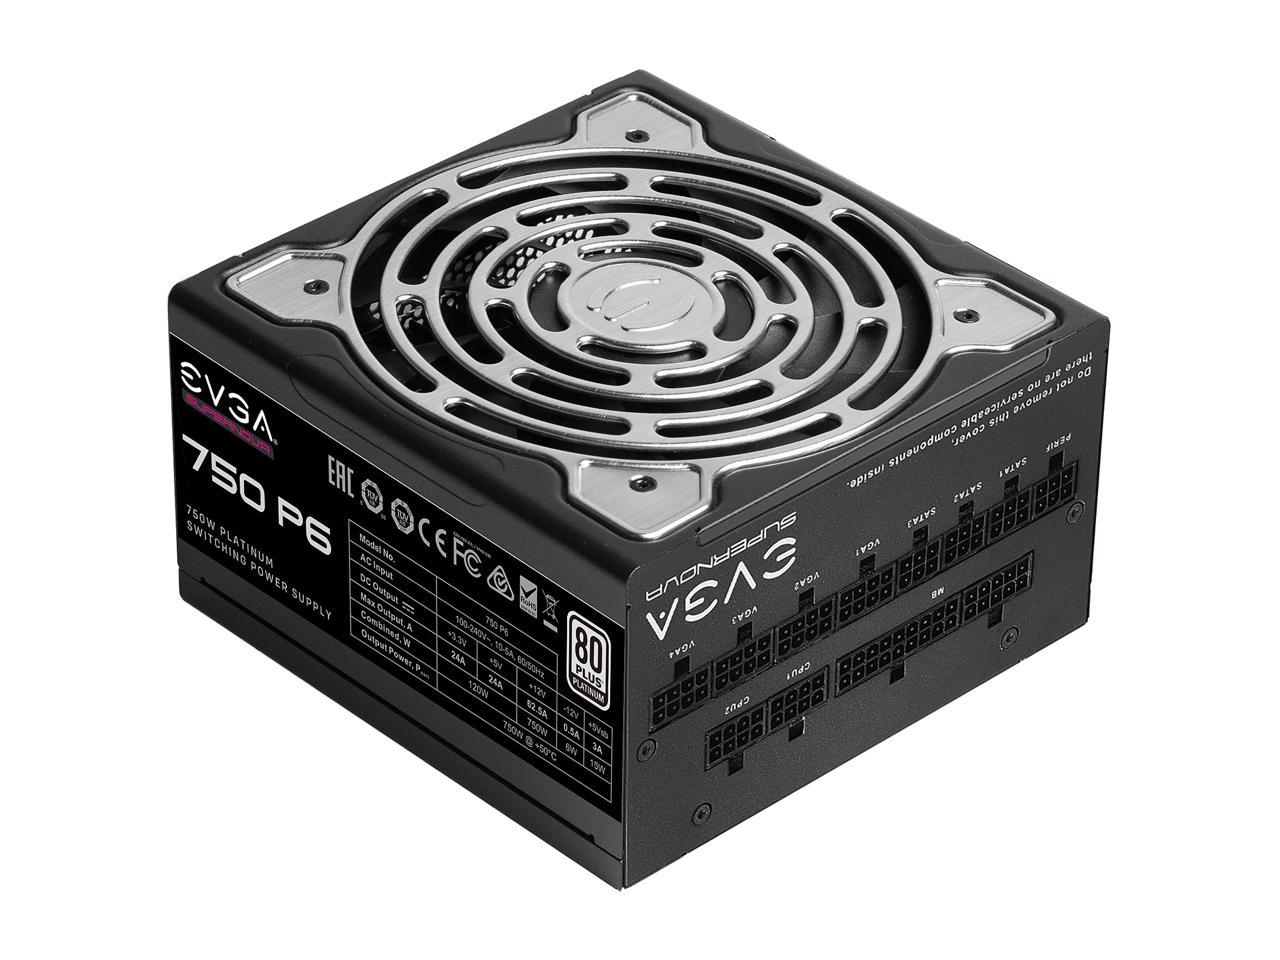 EVGA SuperNOVA 750 P6, 80 Plus Platinum 750W, Fully Modular, Eco Mode with FDB Fan, 10 Year Warranty, Includes Power ON Self Tester, Compact 140mm Size, Power Supply 220-P6-0750-X1